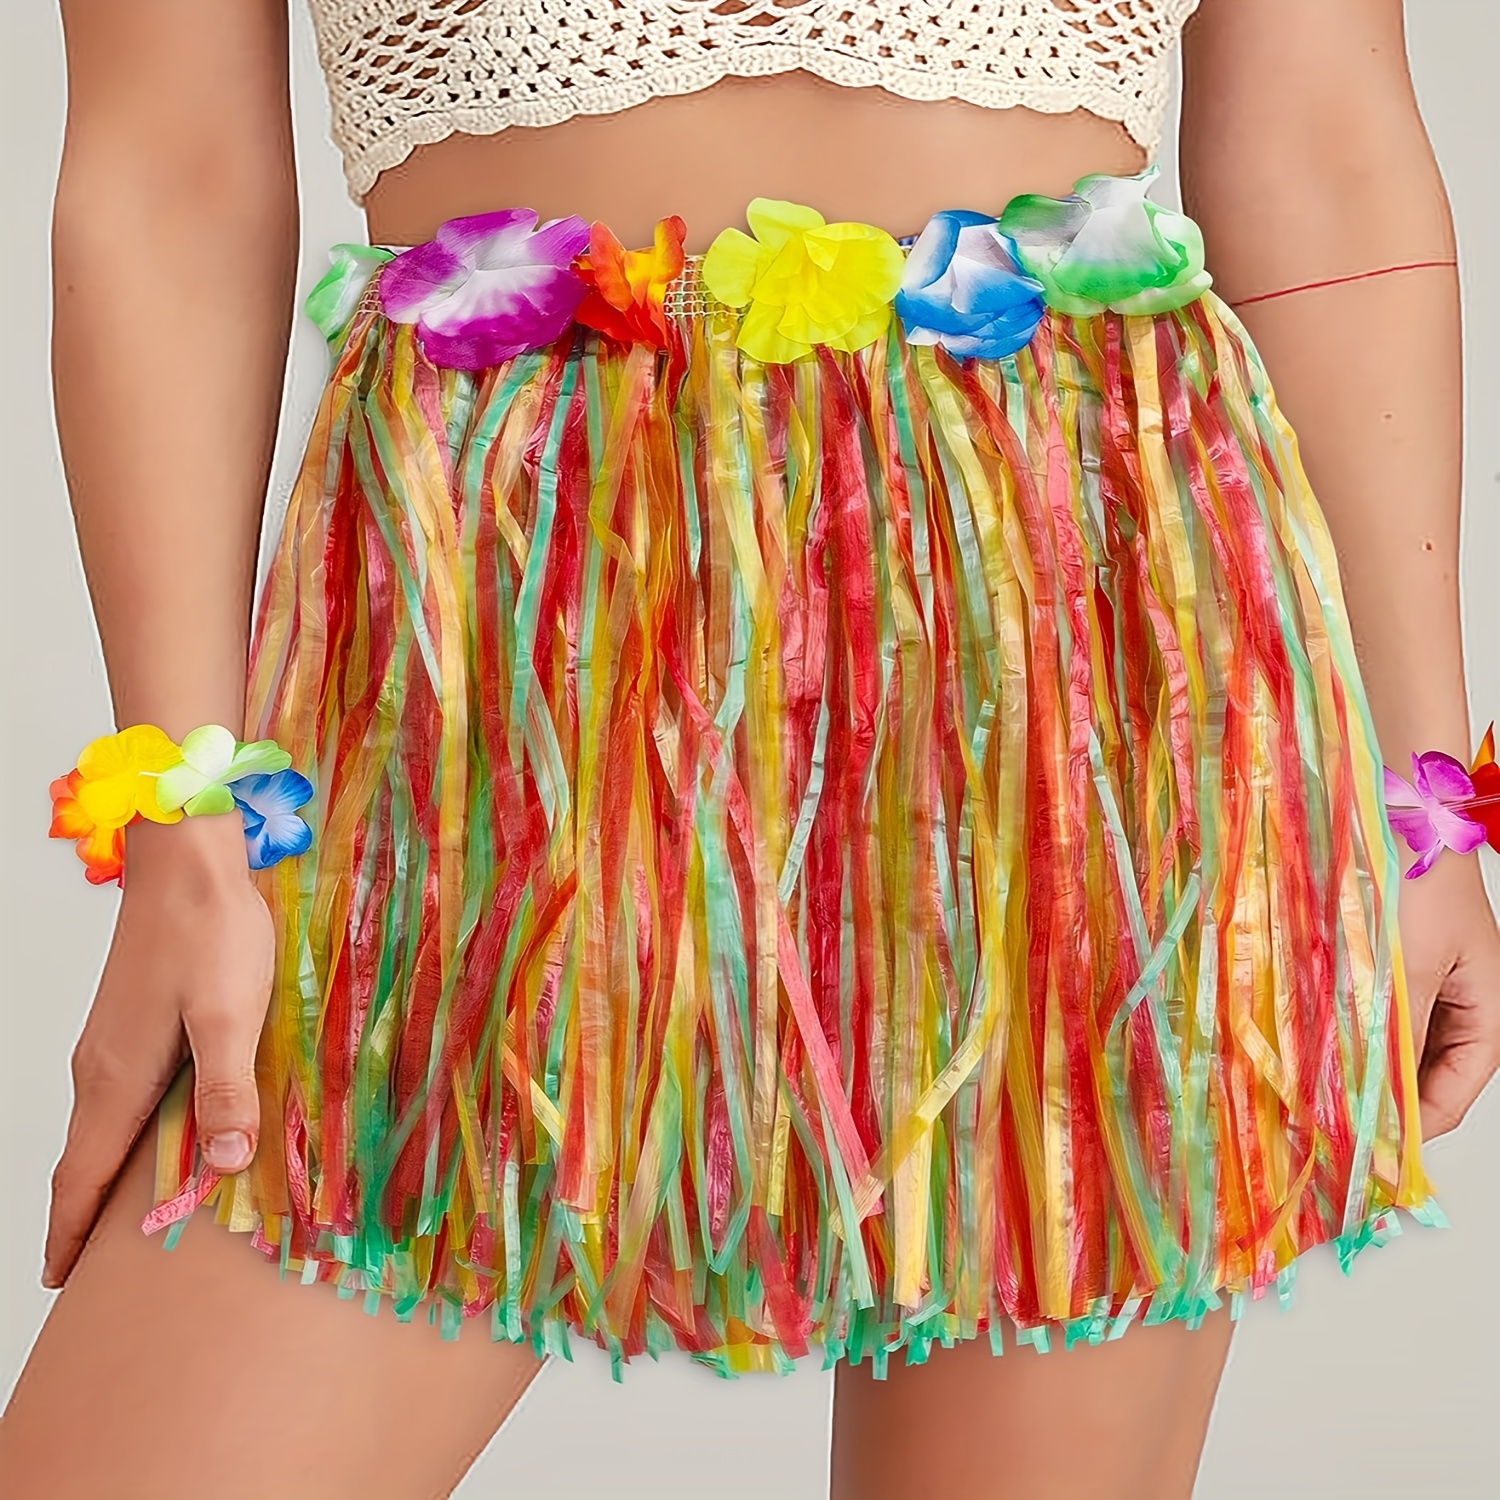 Hawaiian Grass Skirt Costume For Kids Festive Party Supplies With Plastic  Fibers, Perfect For Beach Dances And Patry Decorations From Crocharmsbag,  $1.48